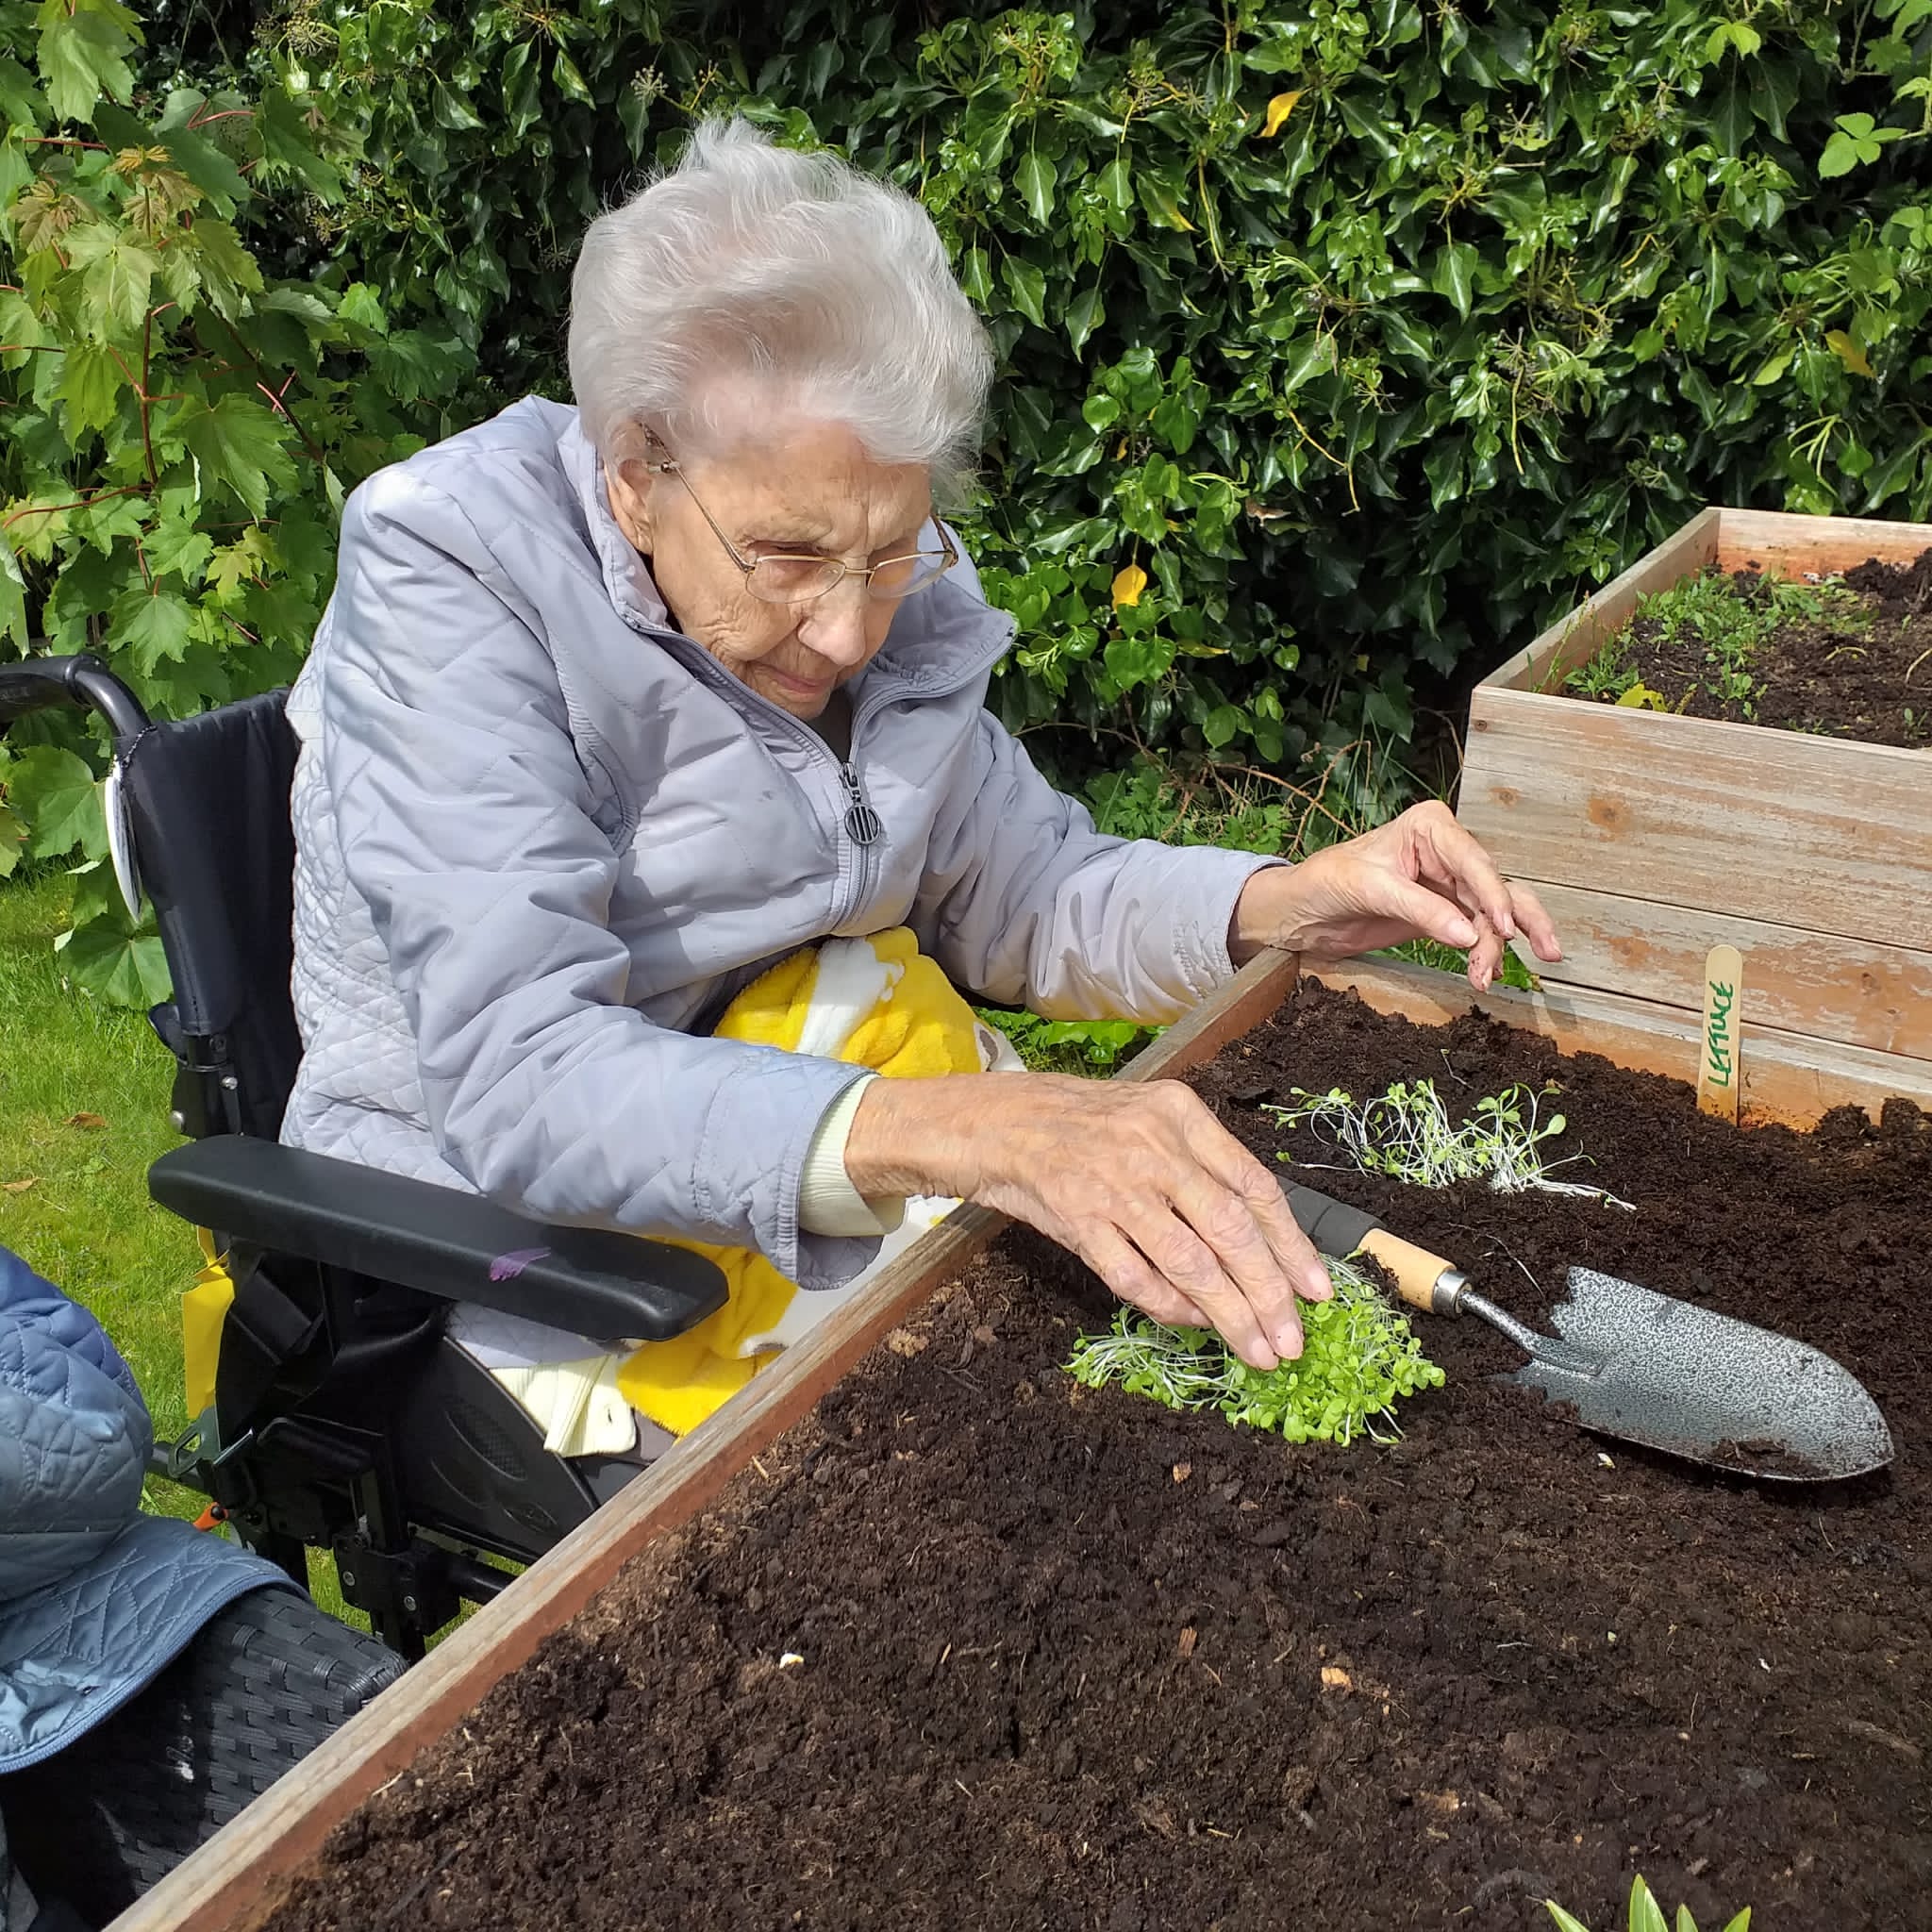 Residents Helping to Plant Cress